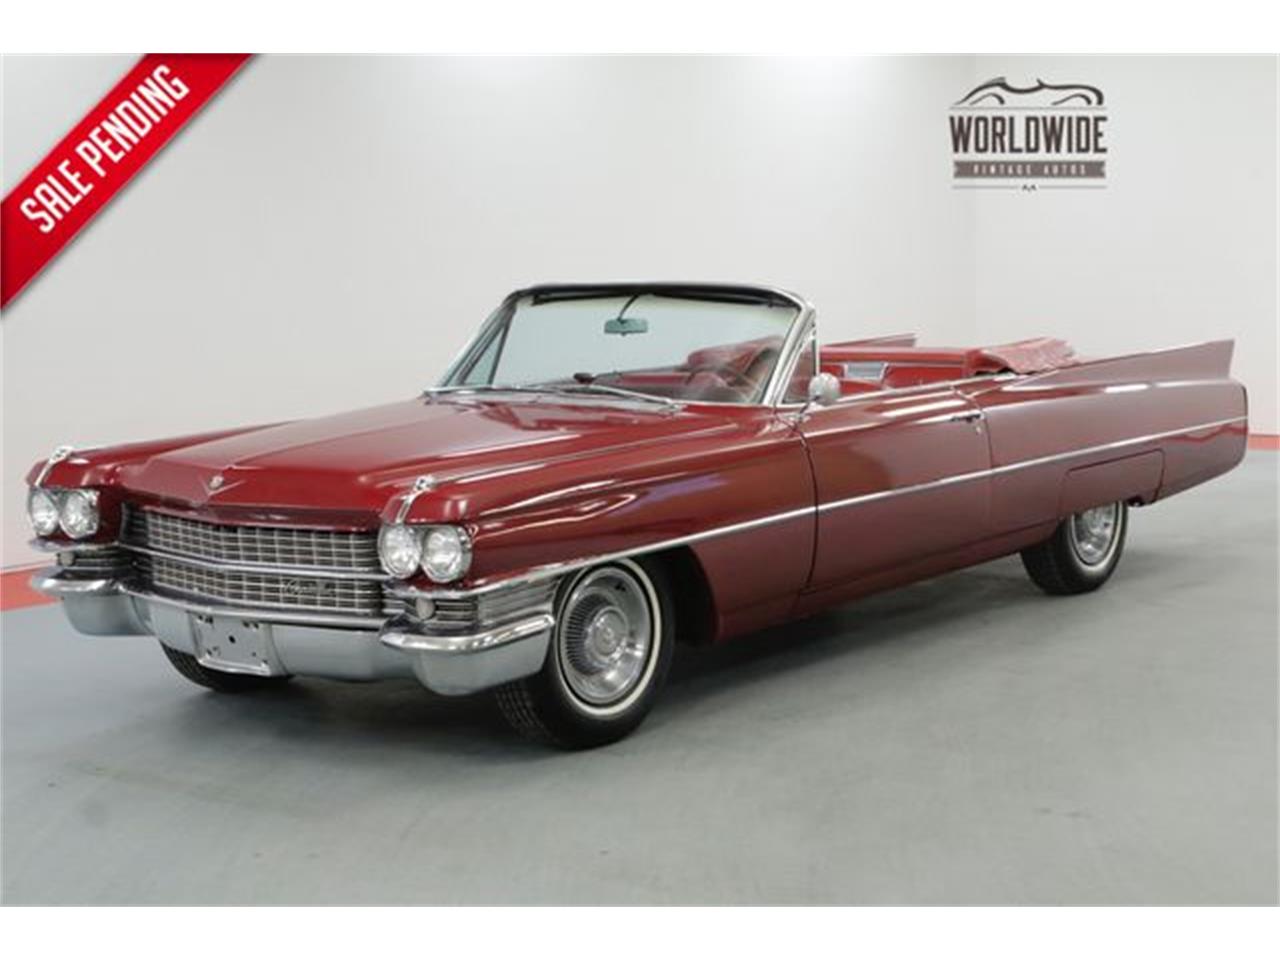 1963 cadillac convertible for sale classiccars com cc 1085270 1963 cadillac convertible for sale